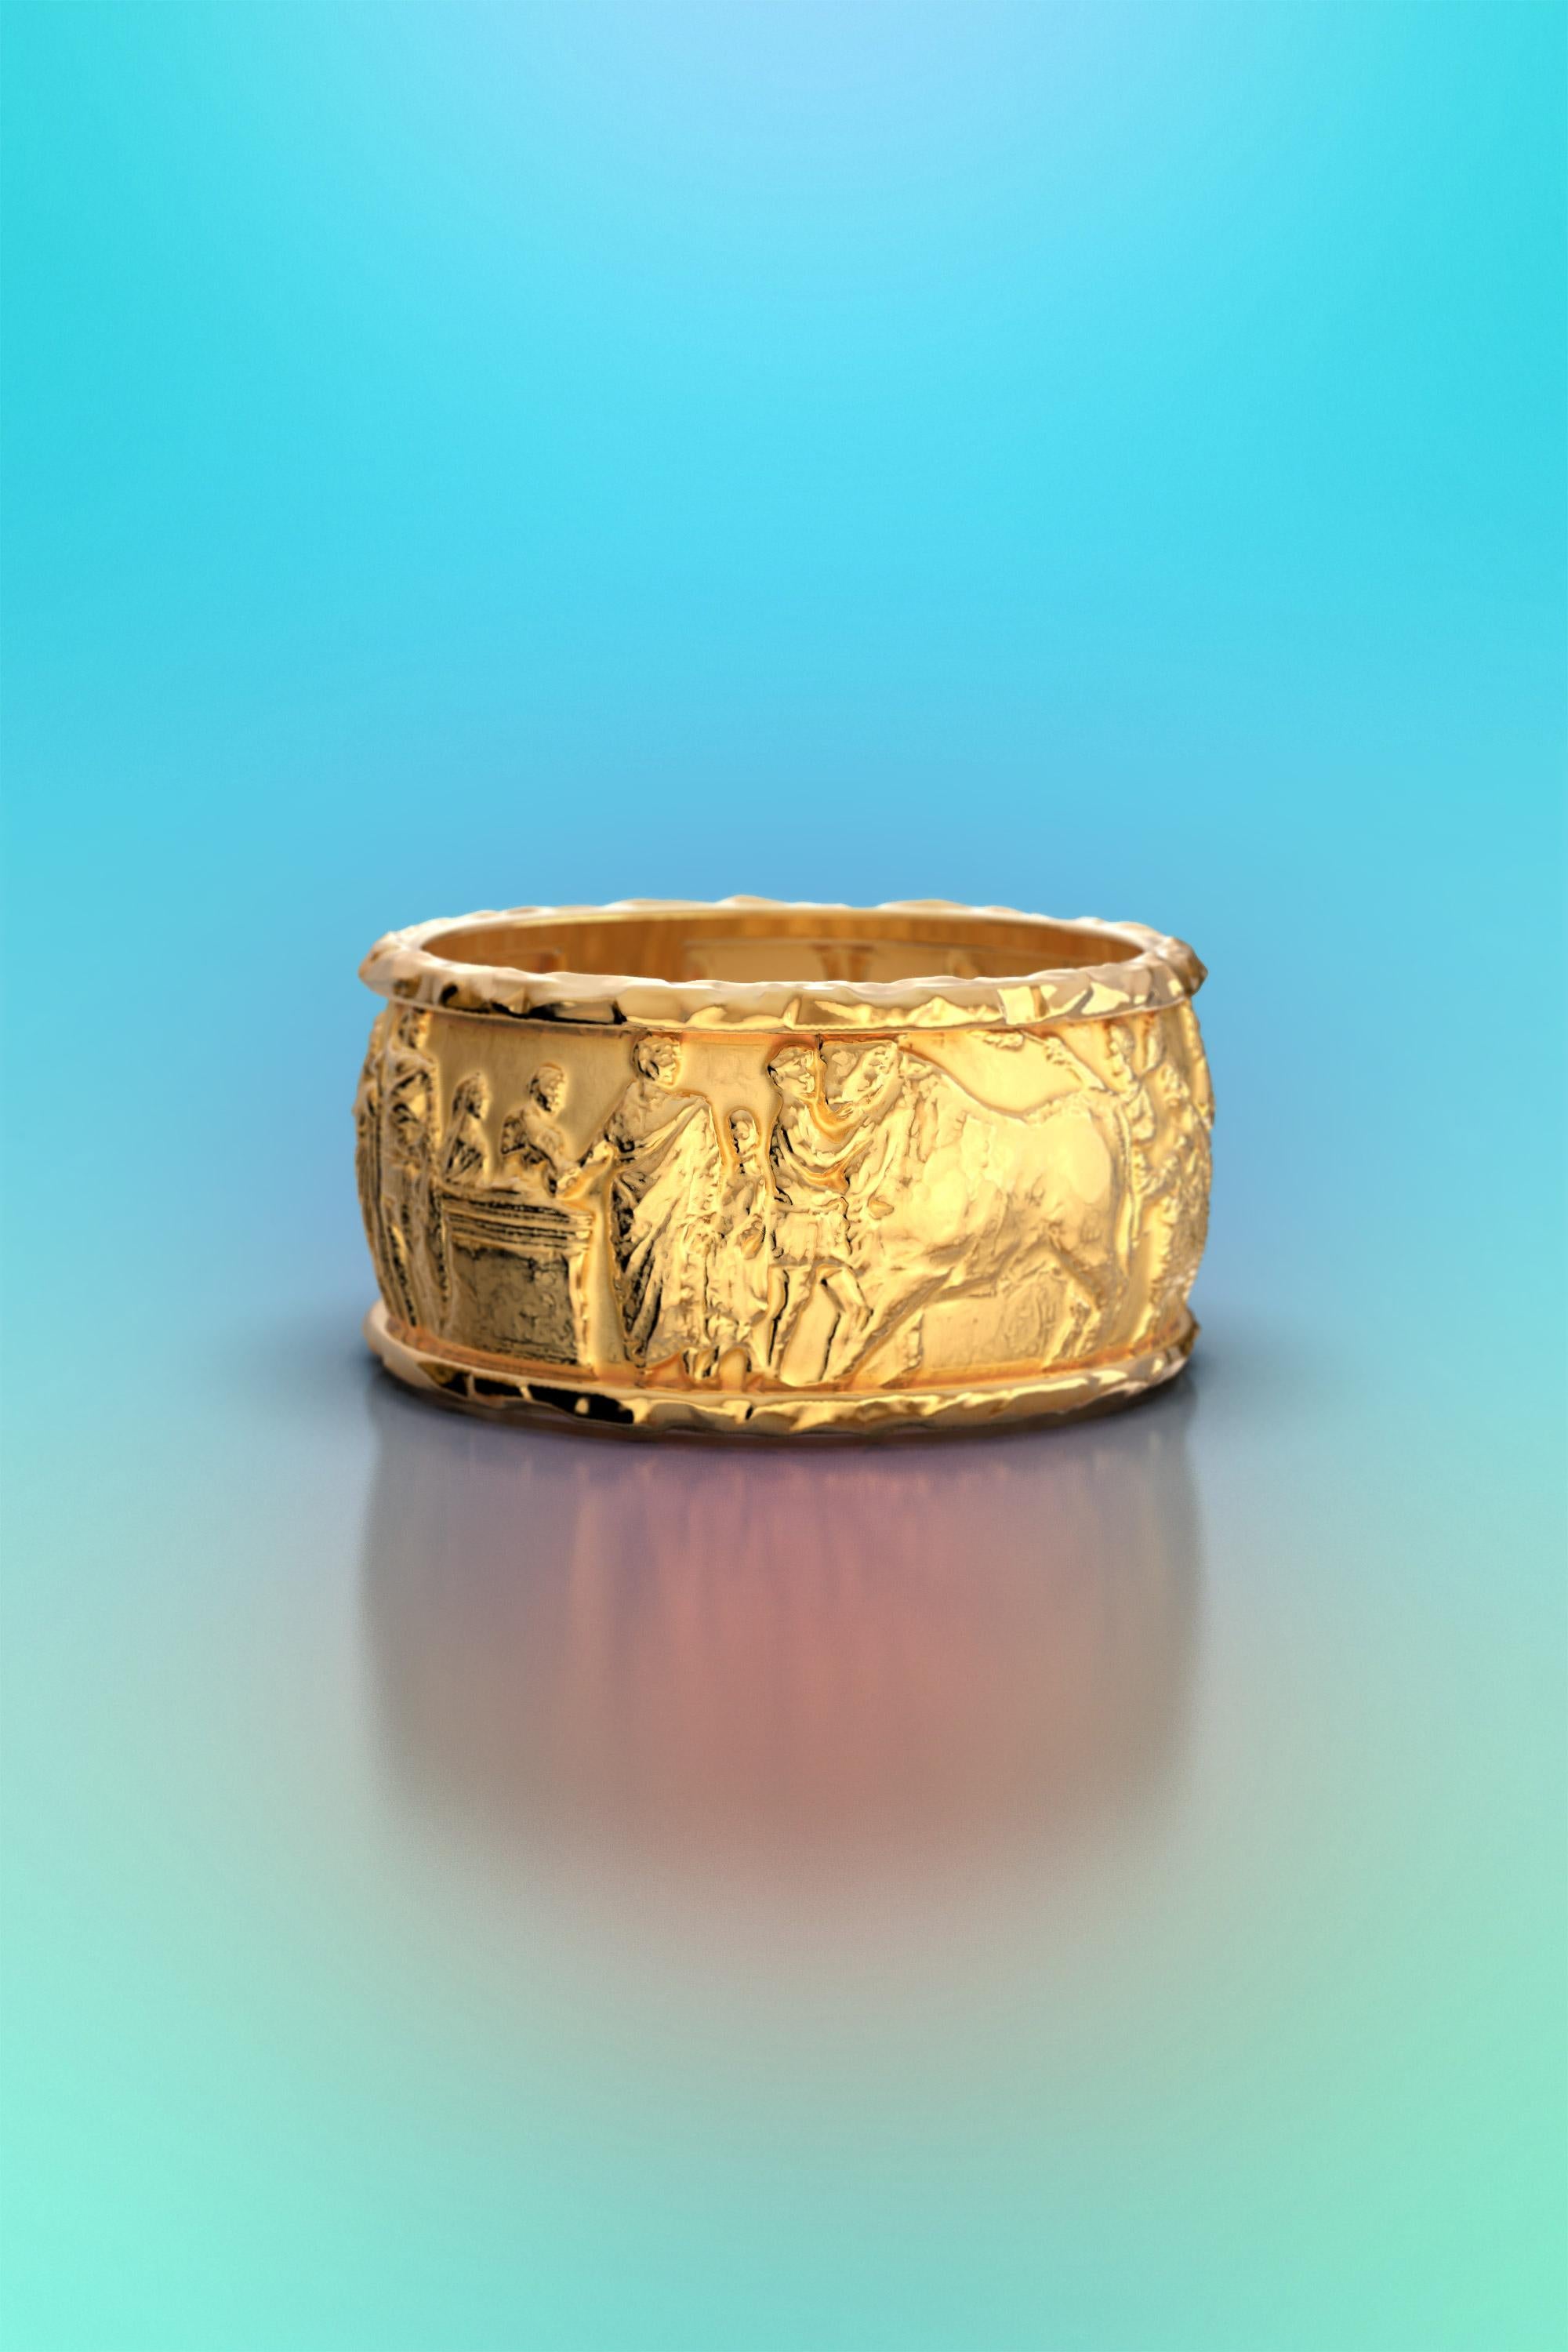 For Sale:  Sculptural Ring, Ancient Style Solid Gold Ring, 14k Gold Ring Made in Italy 2